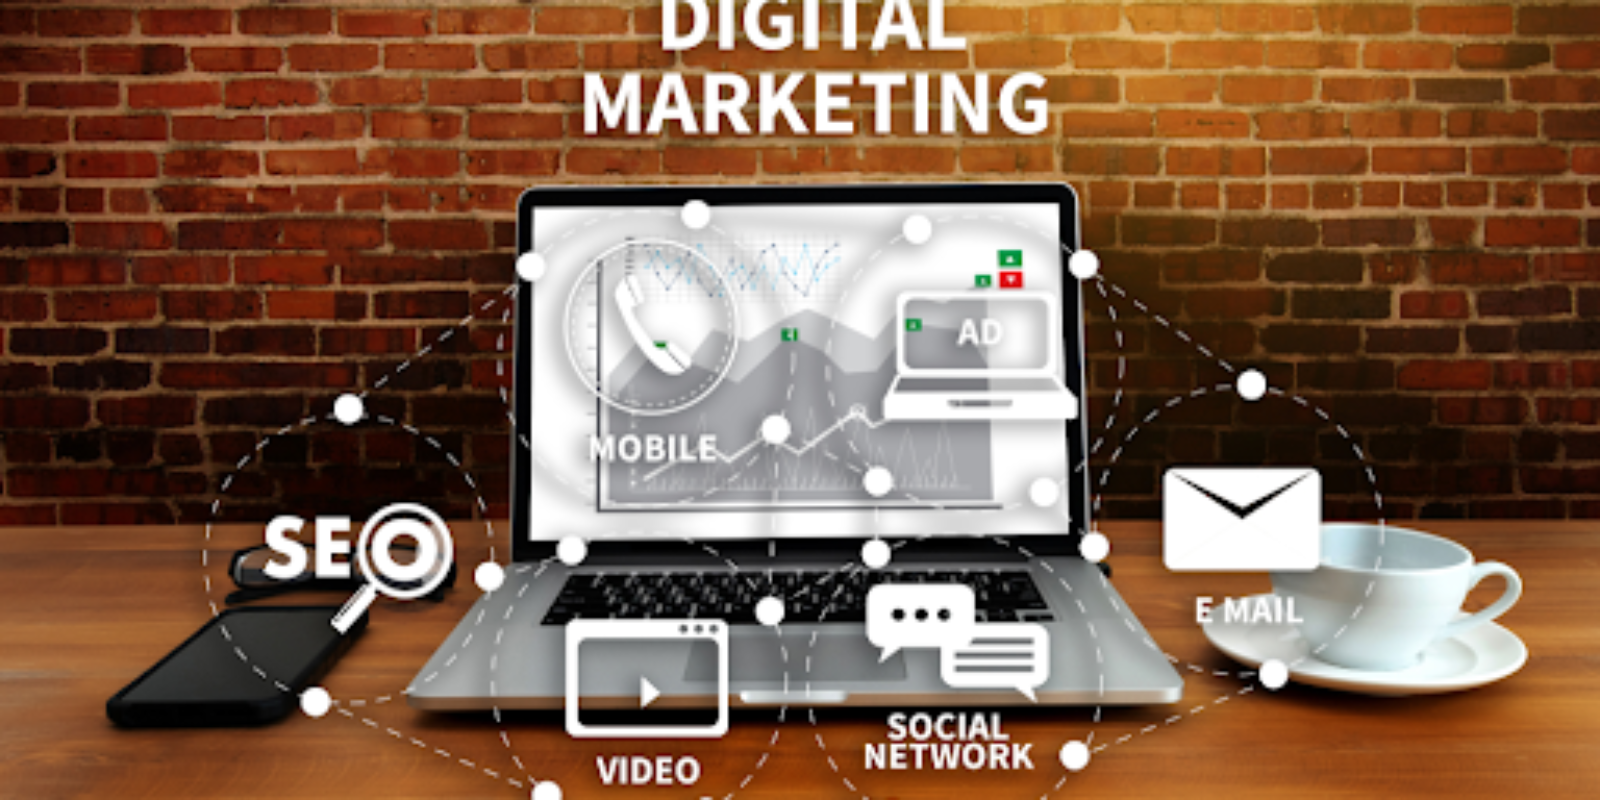 4 tips to effectively use digital marketing for your business